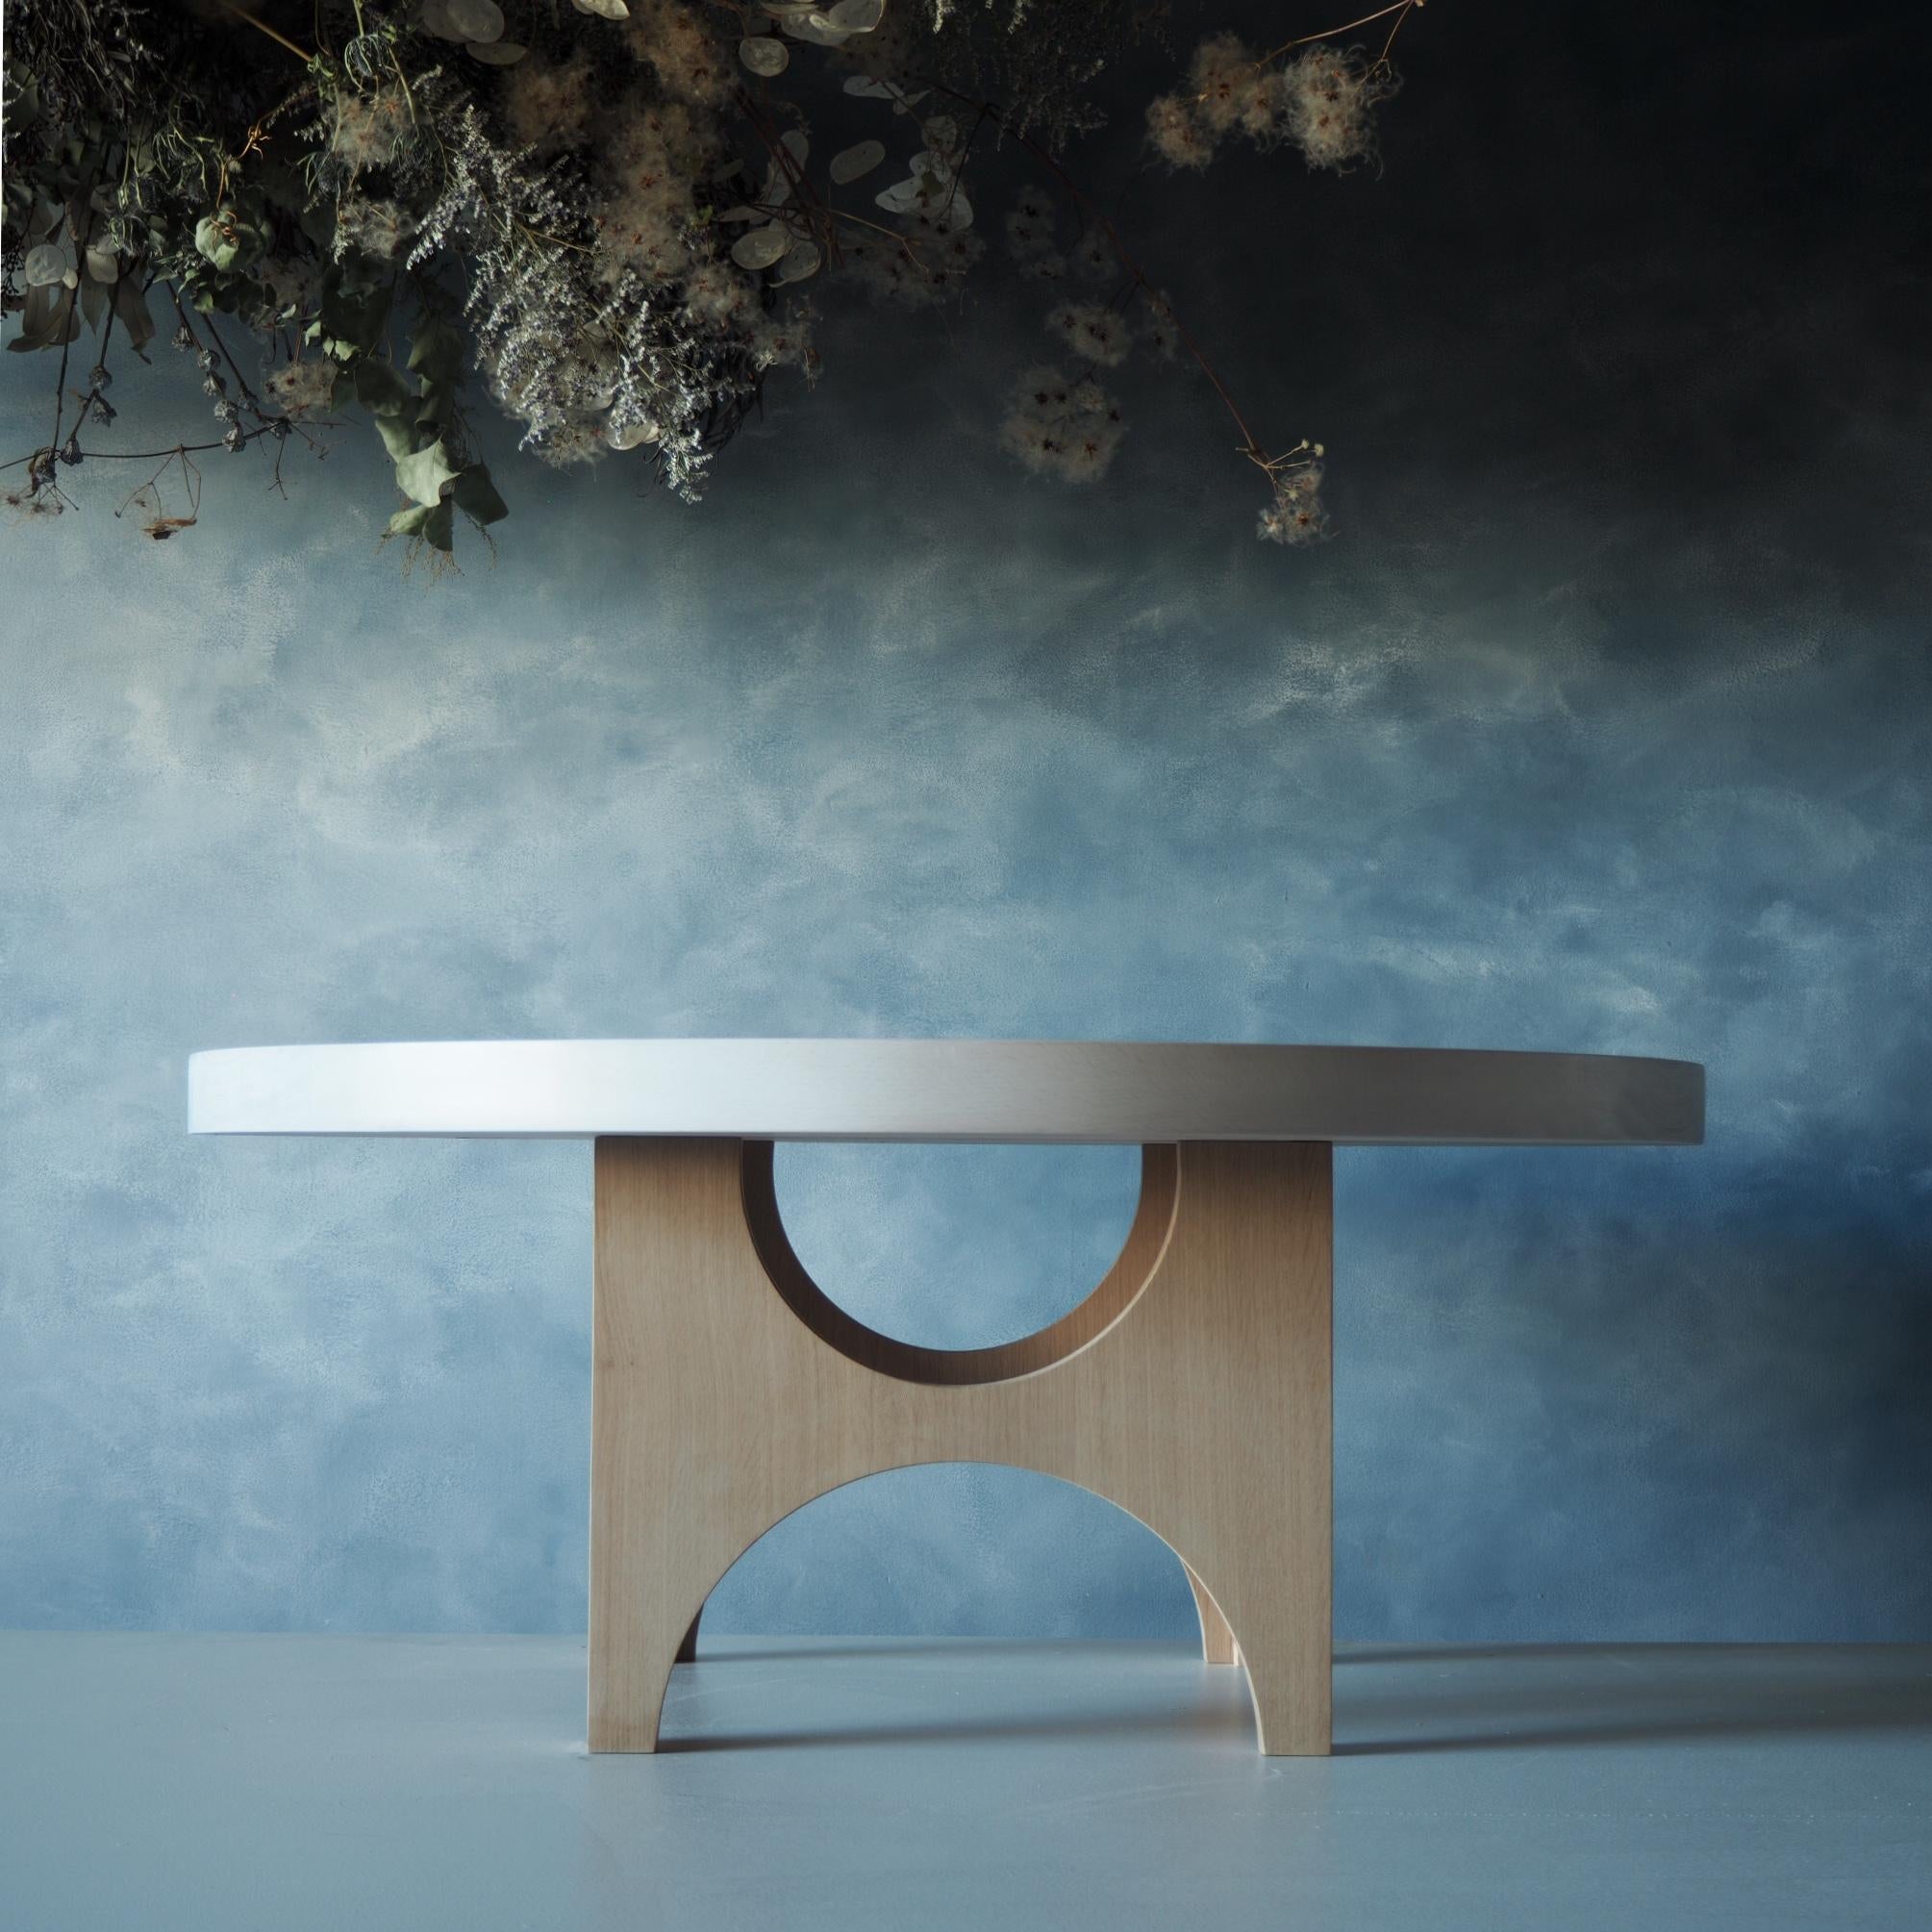 Our Eggshell coffee table blends in with a variety of home decors. With it's beautifully white solid beech wood top and curved oak base in can feel comfortable in many different interior spaces.

The table top is Beech that has been bleached and